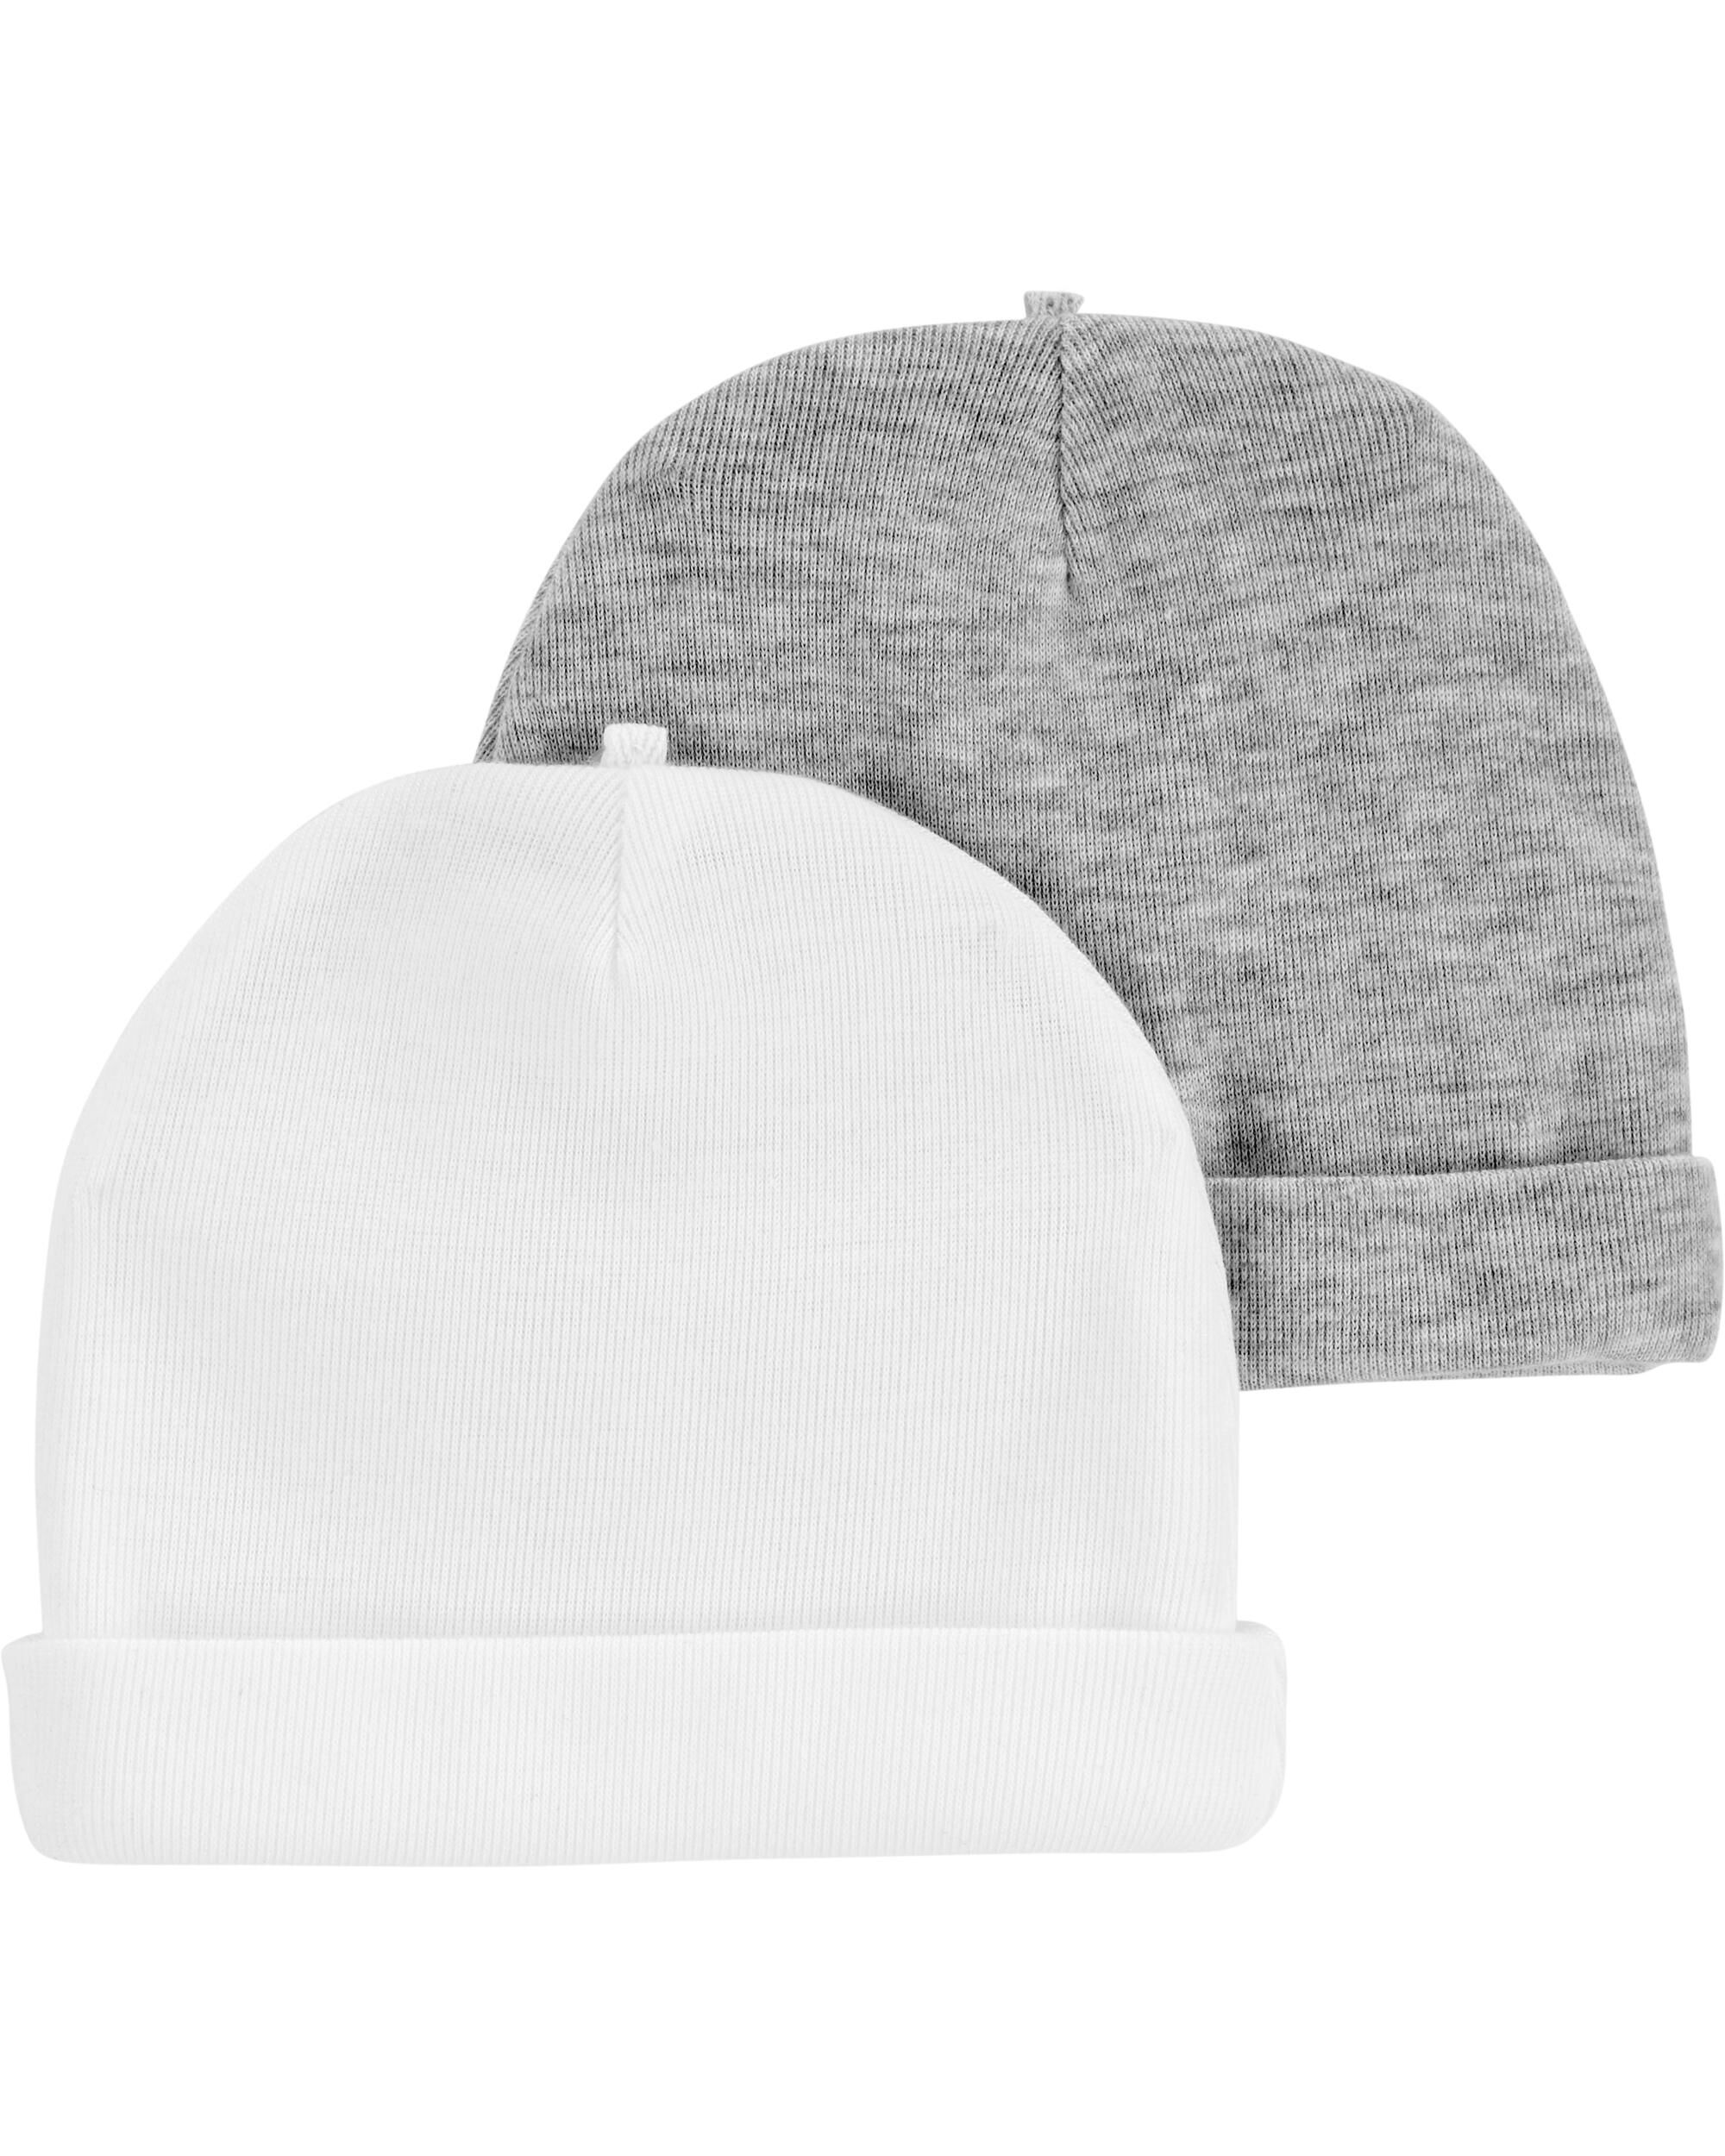 Baby Soft Cotton White Hats x 2 pack 